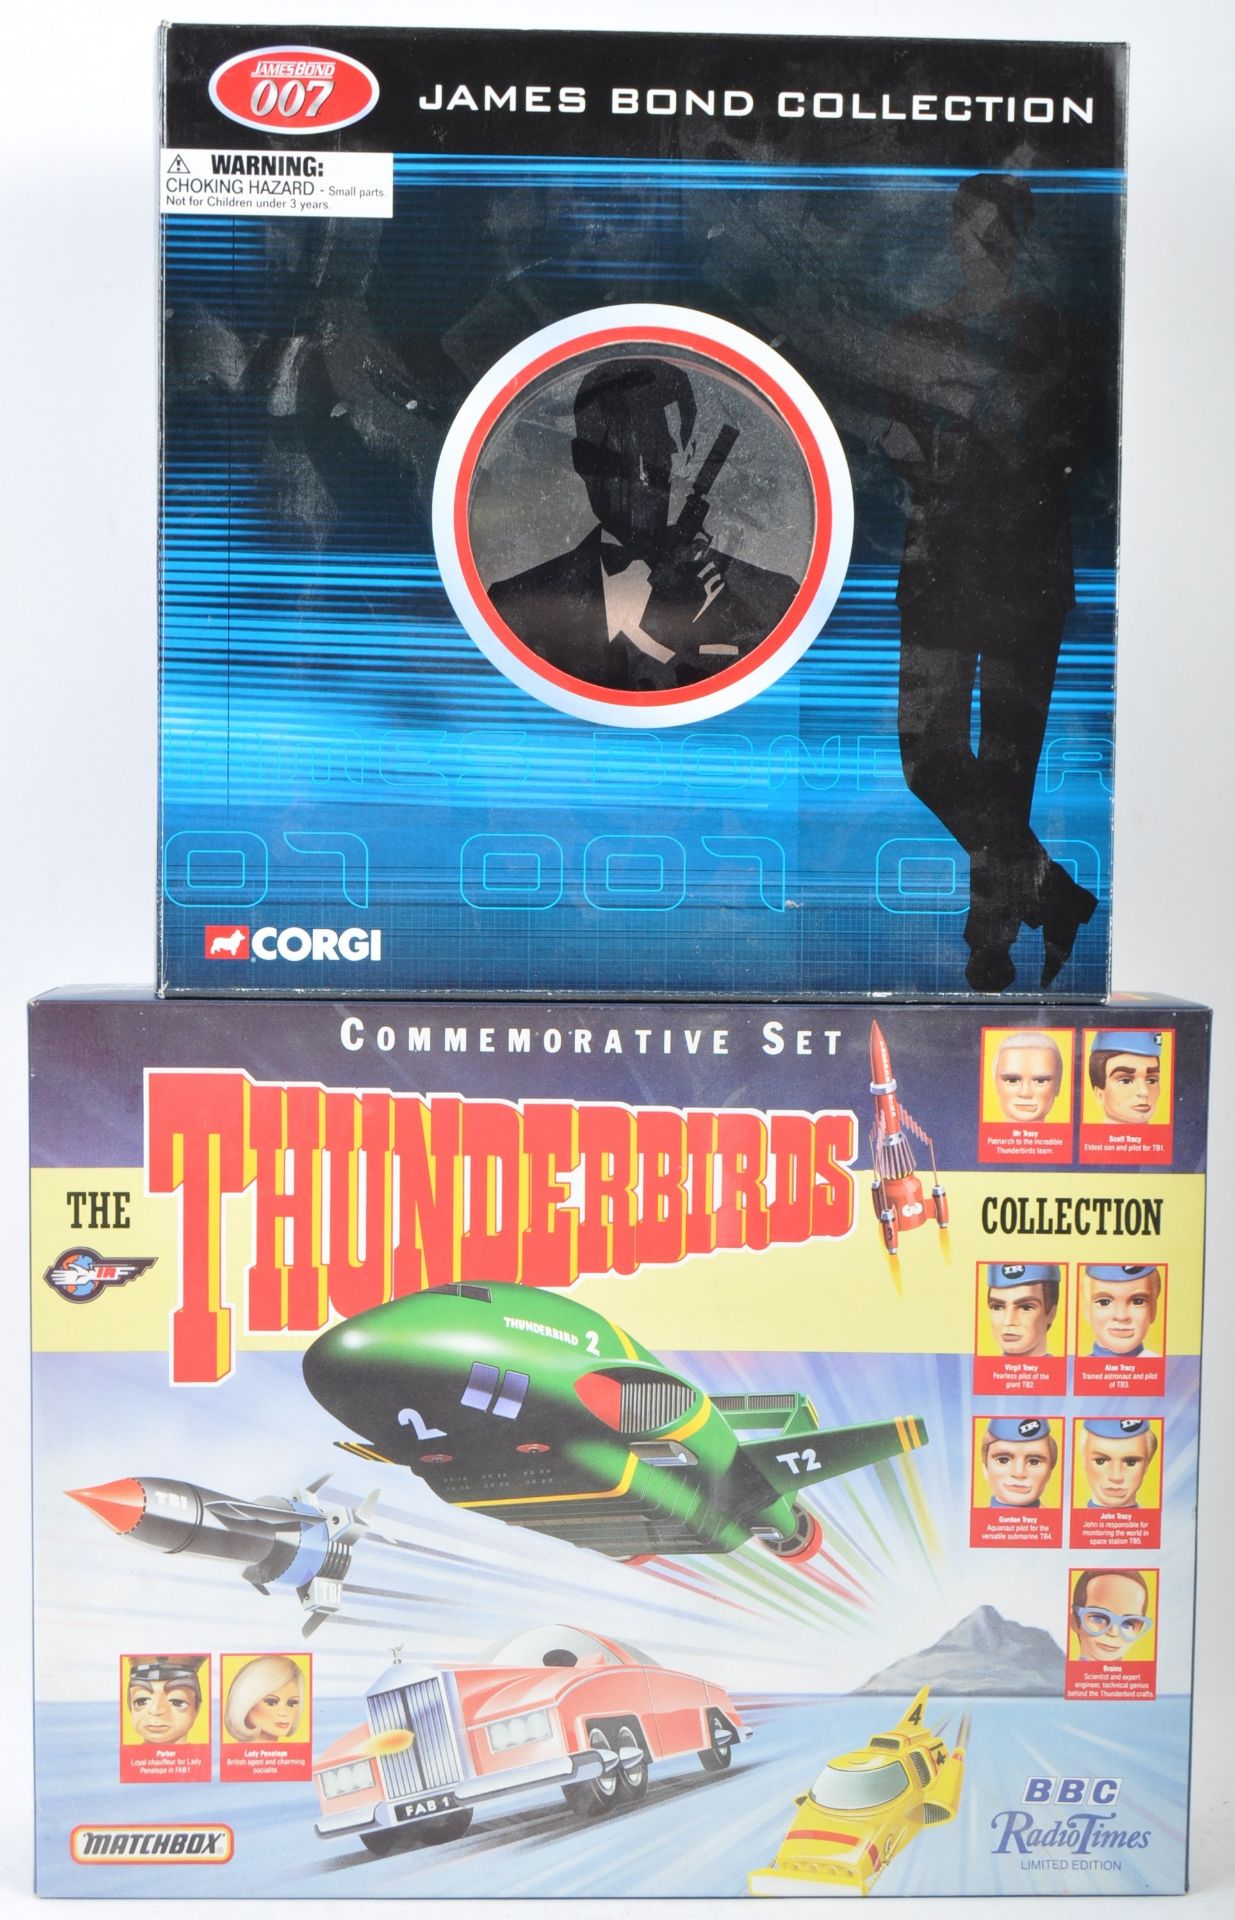 TWO TV AND FILM RELATED DIECAST MODEL GIFT SETS